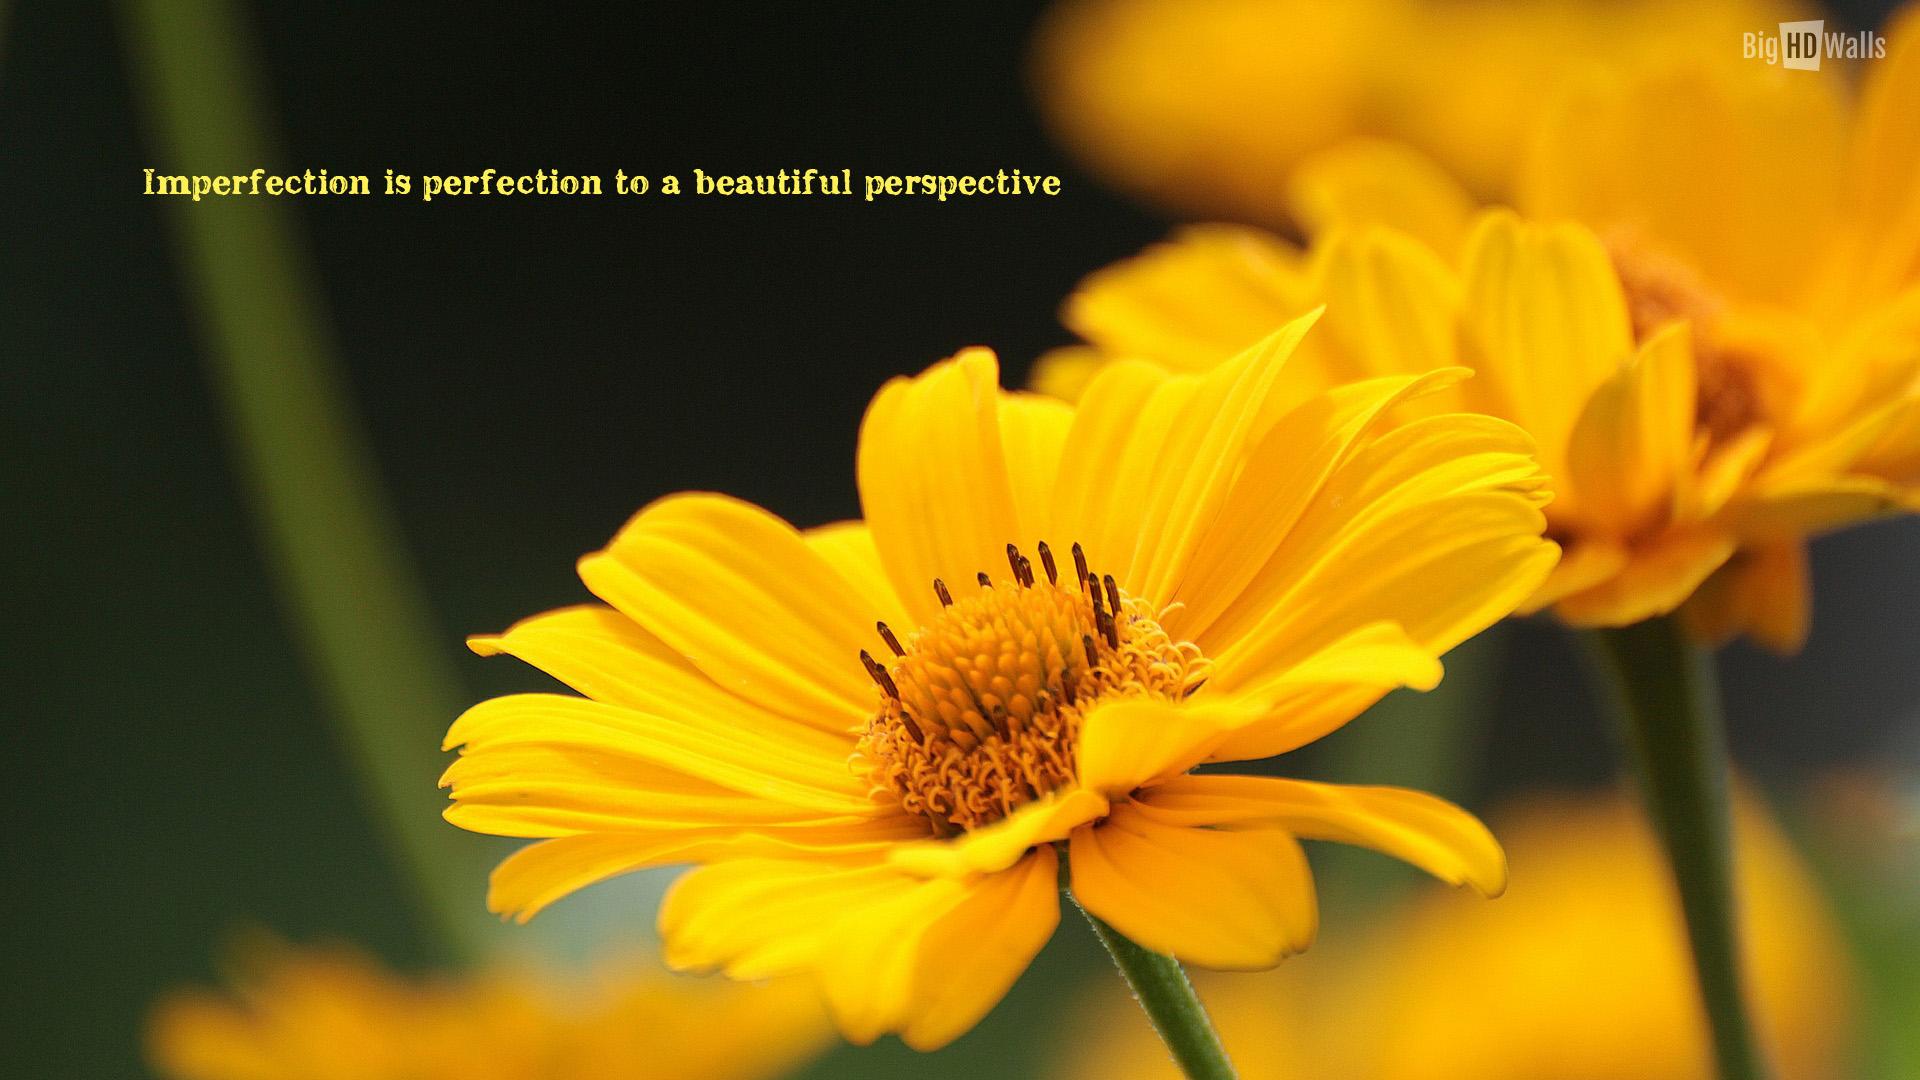 Free download Beautiful yellow flower with an awesome quote